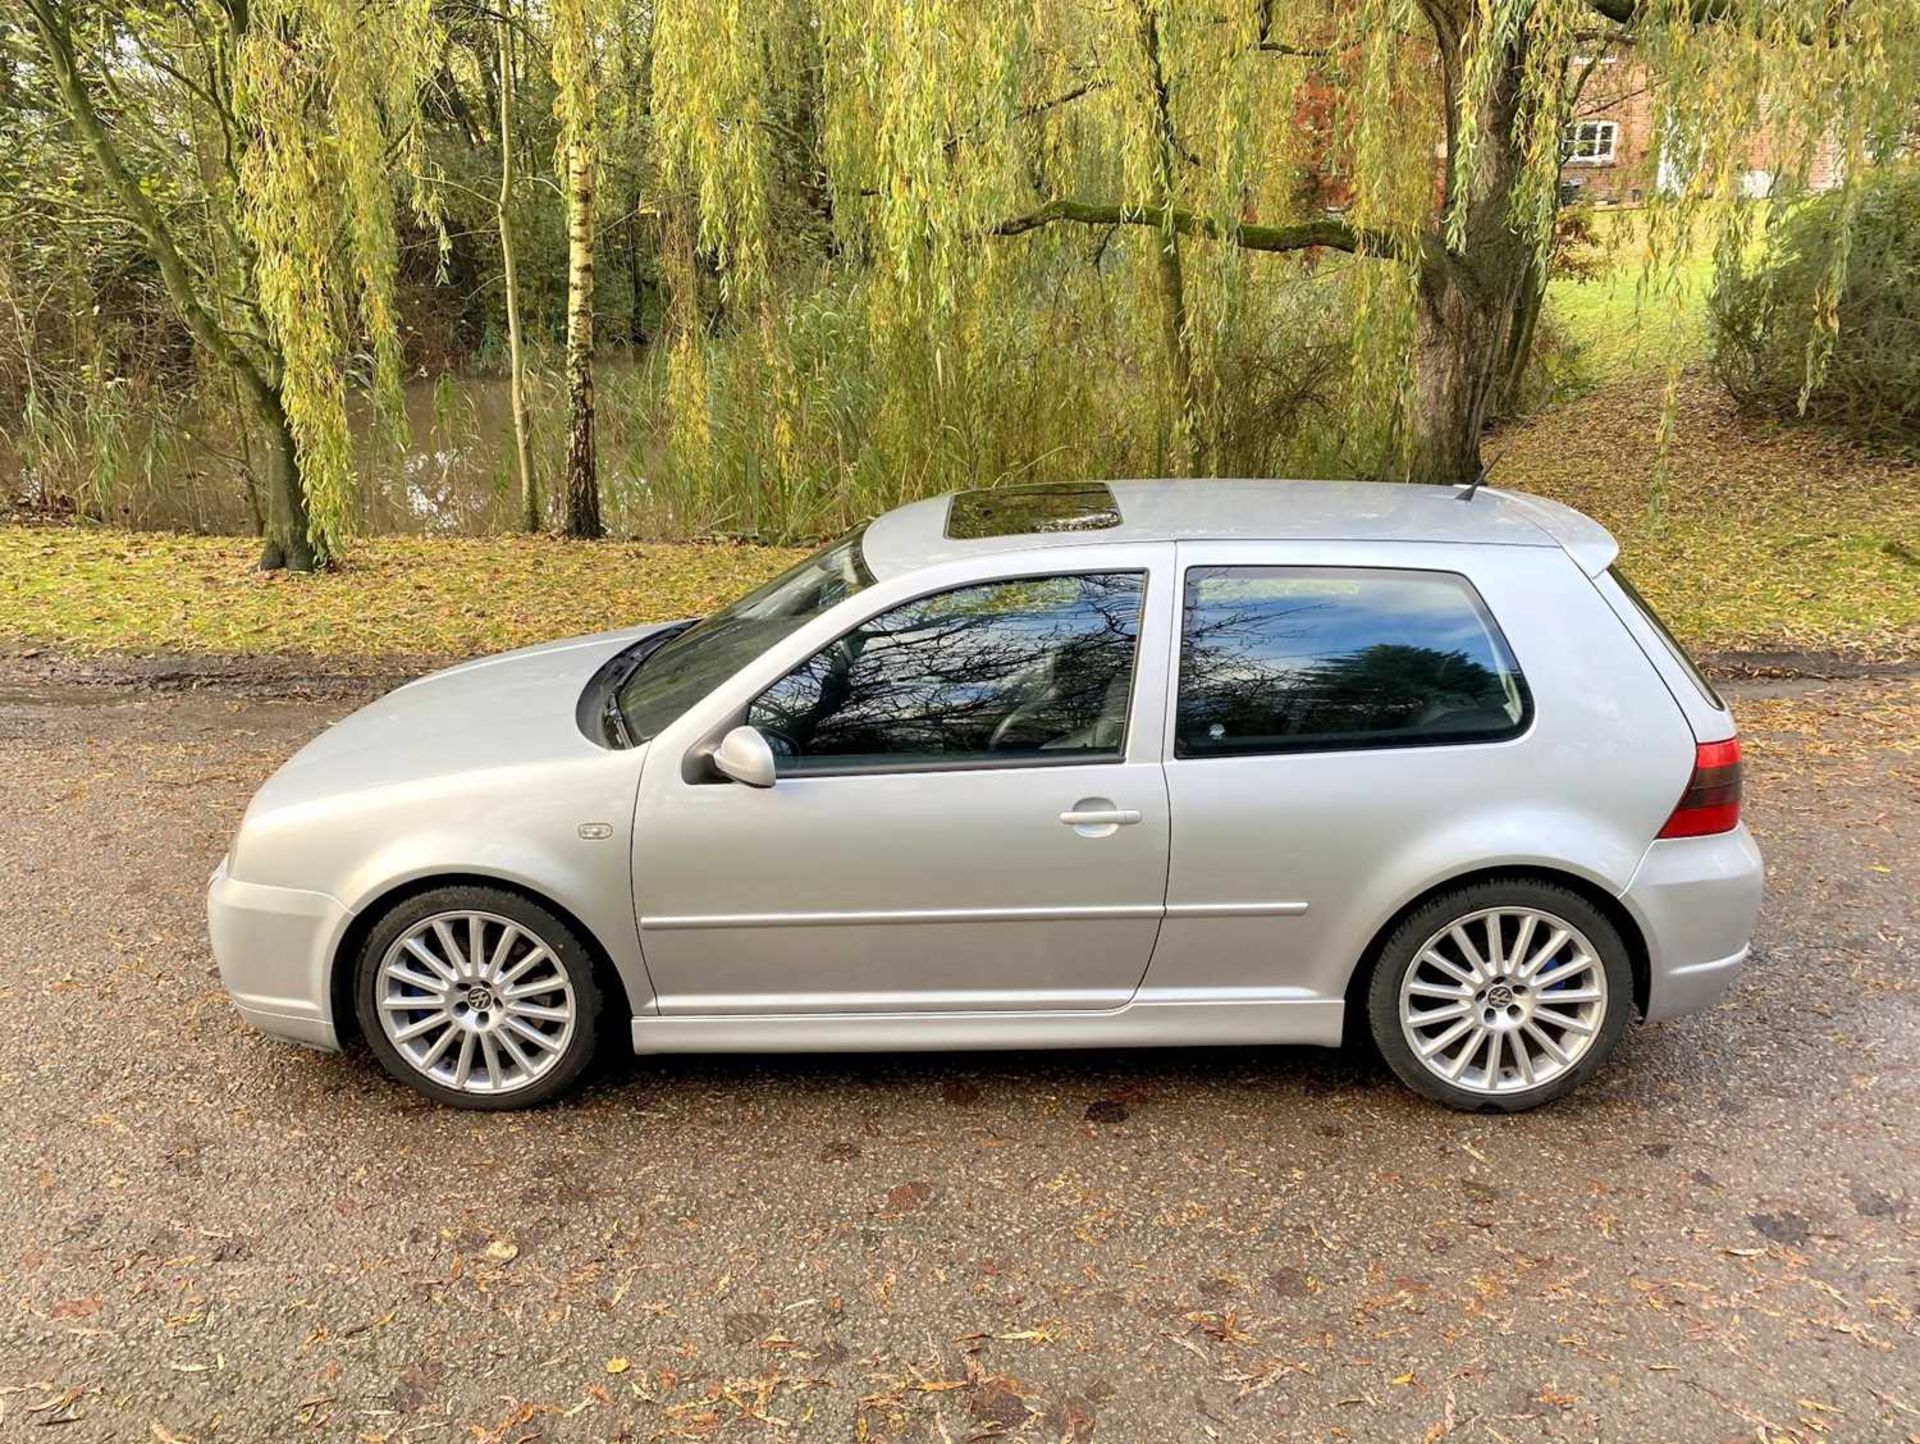 2003 Volkswagen Golf R32 In current ownership for sixteen years - Image 14 of 94